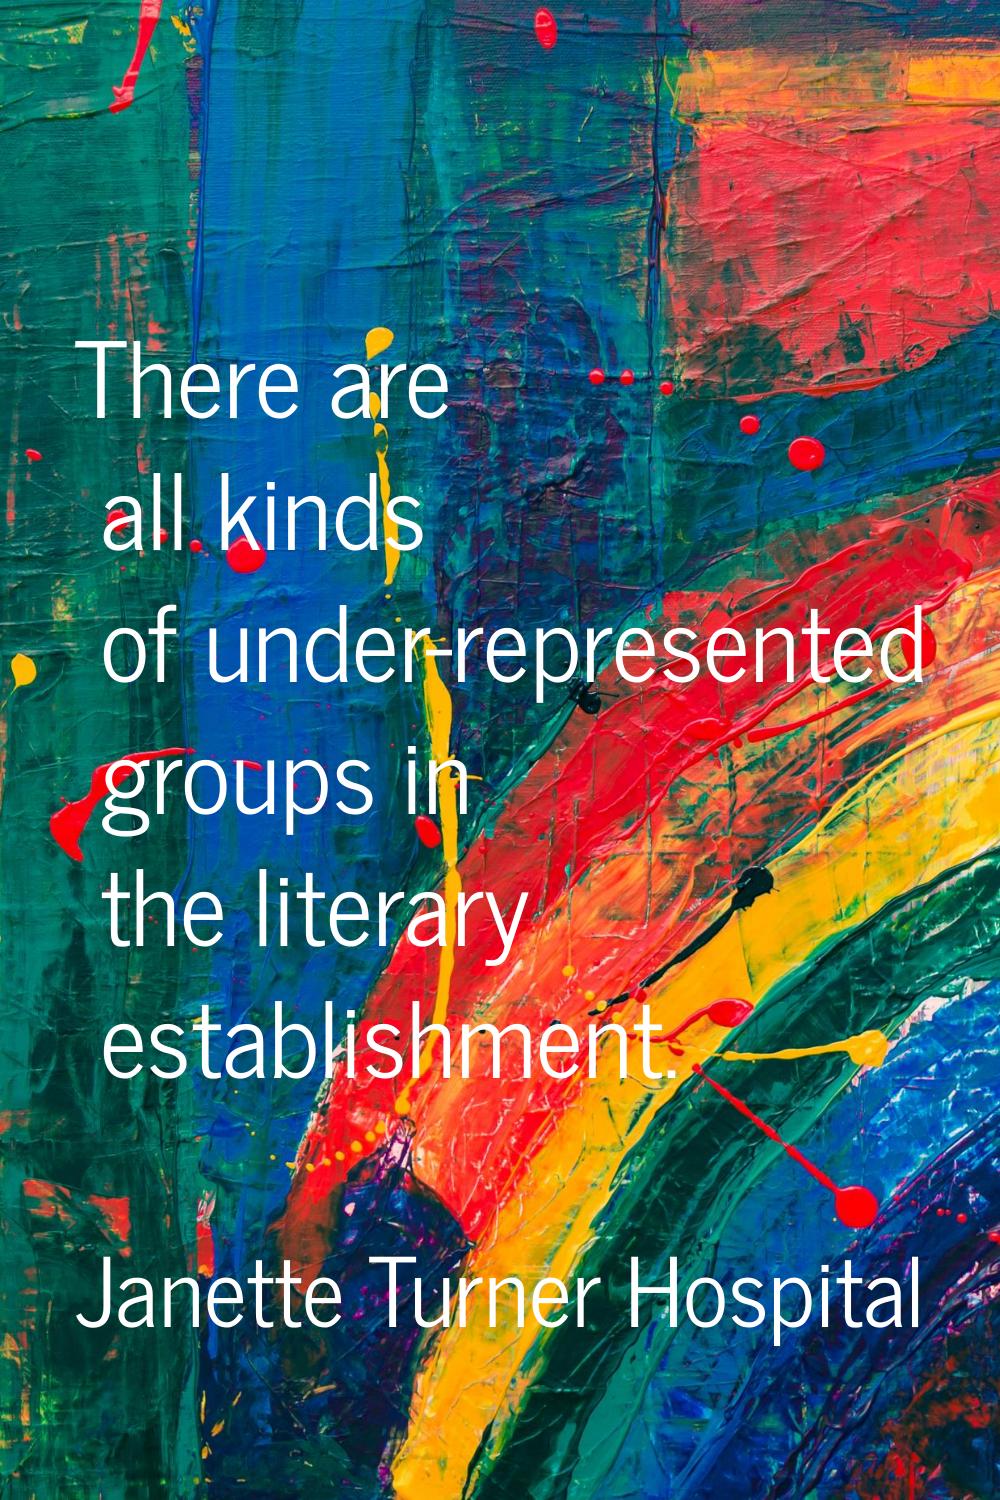 There are all kinds of under-represented groups in the literary establishment.